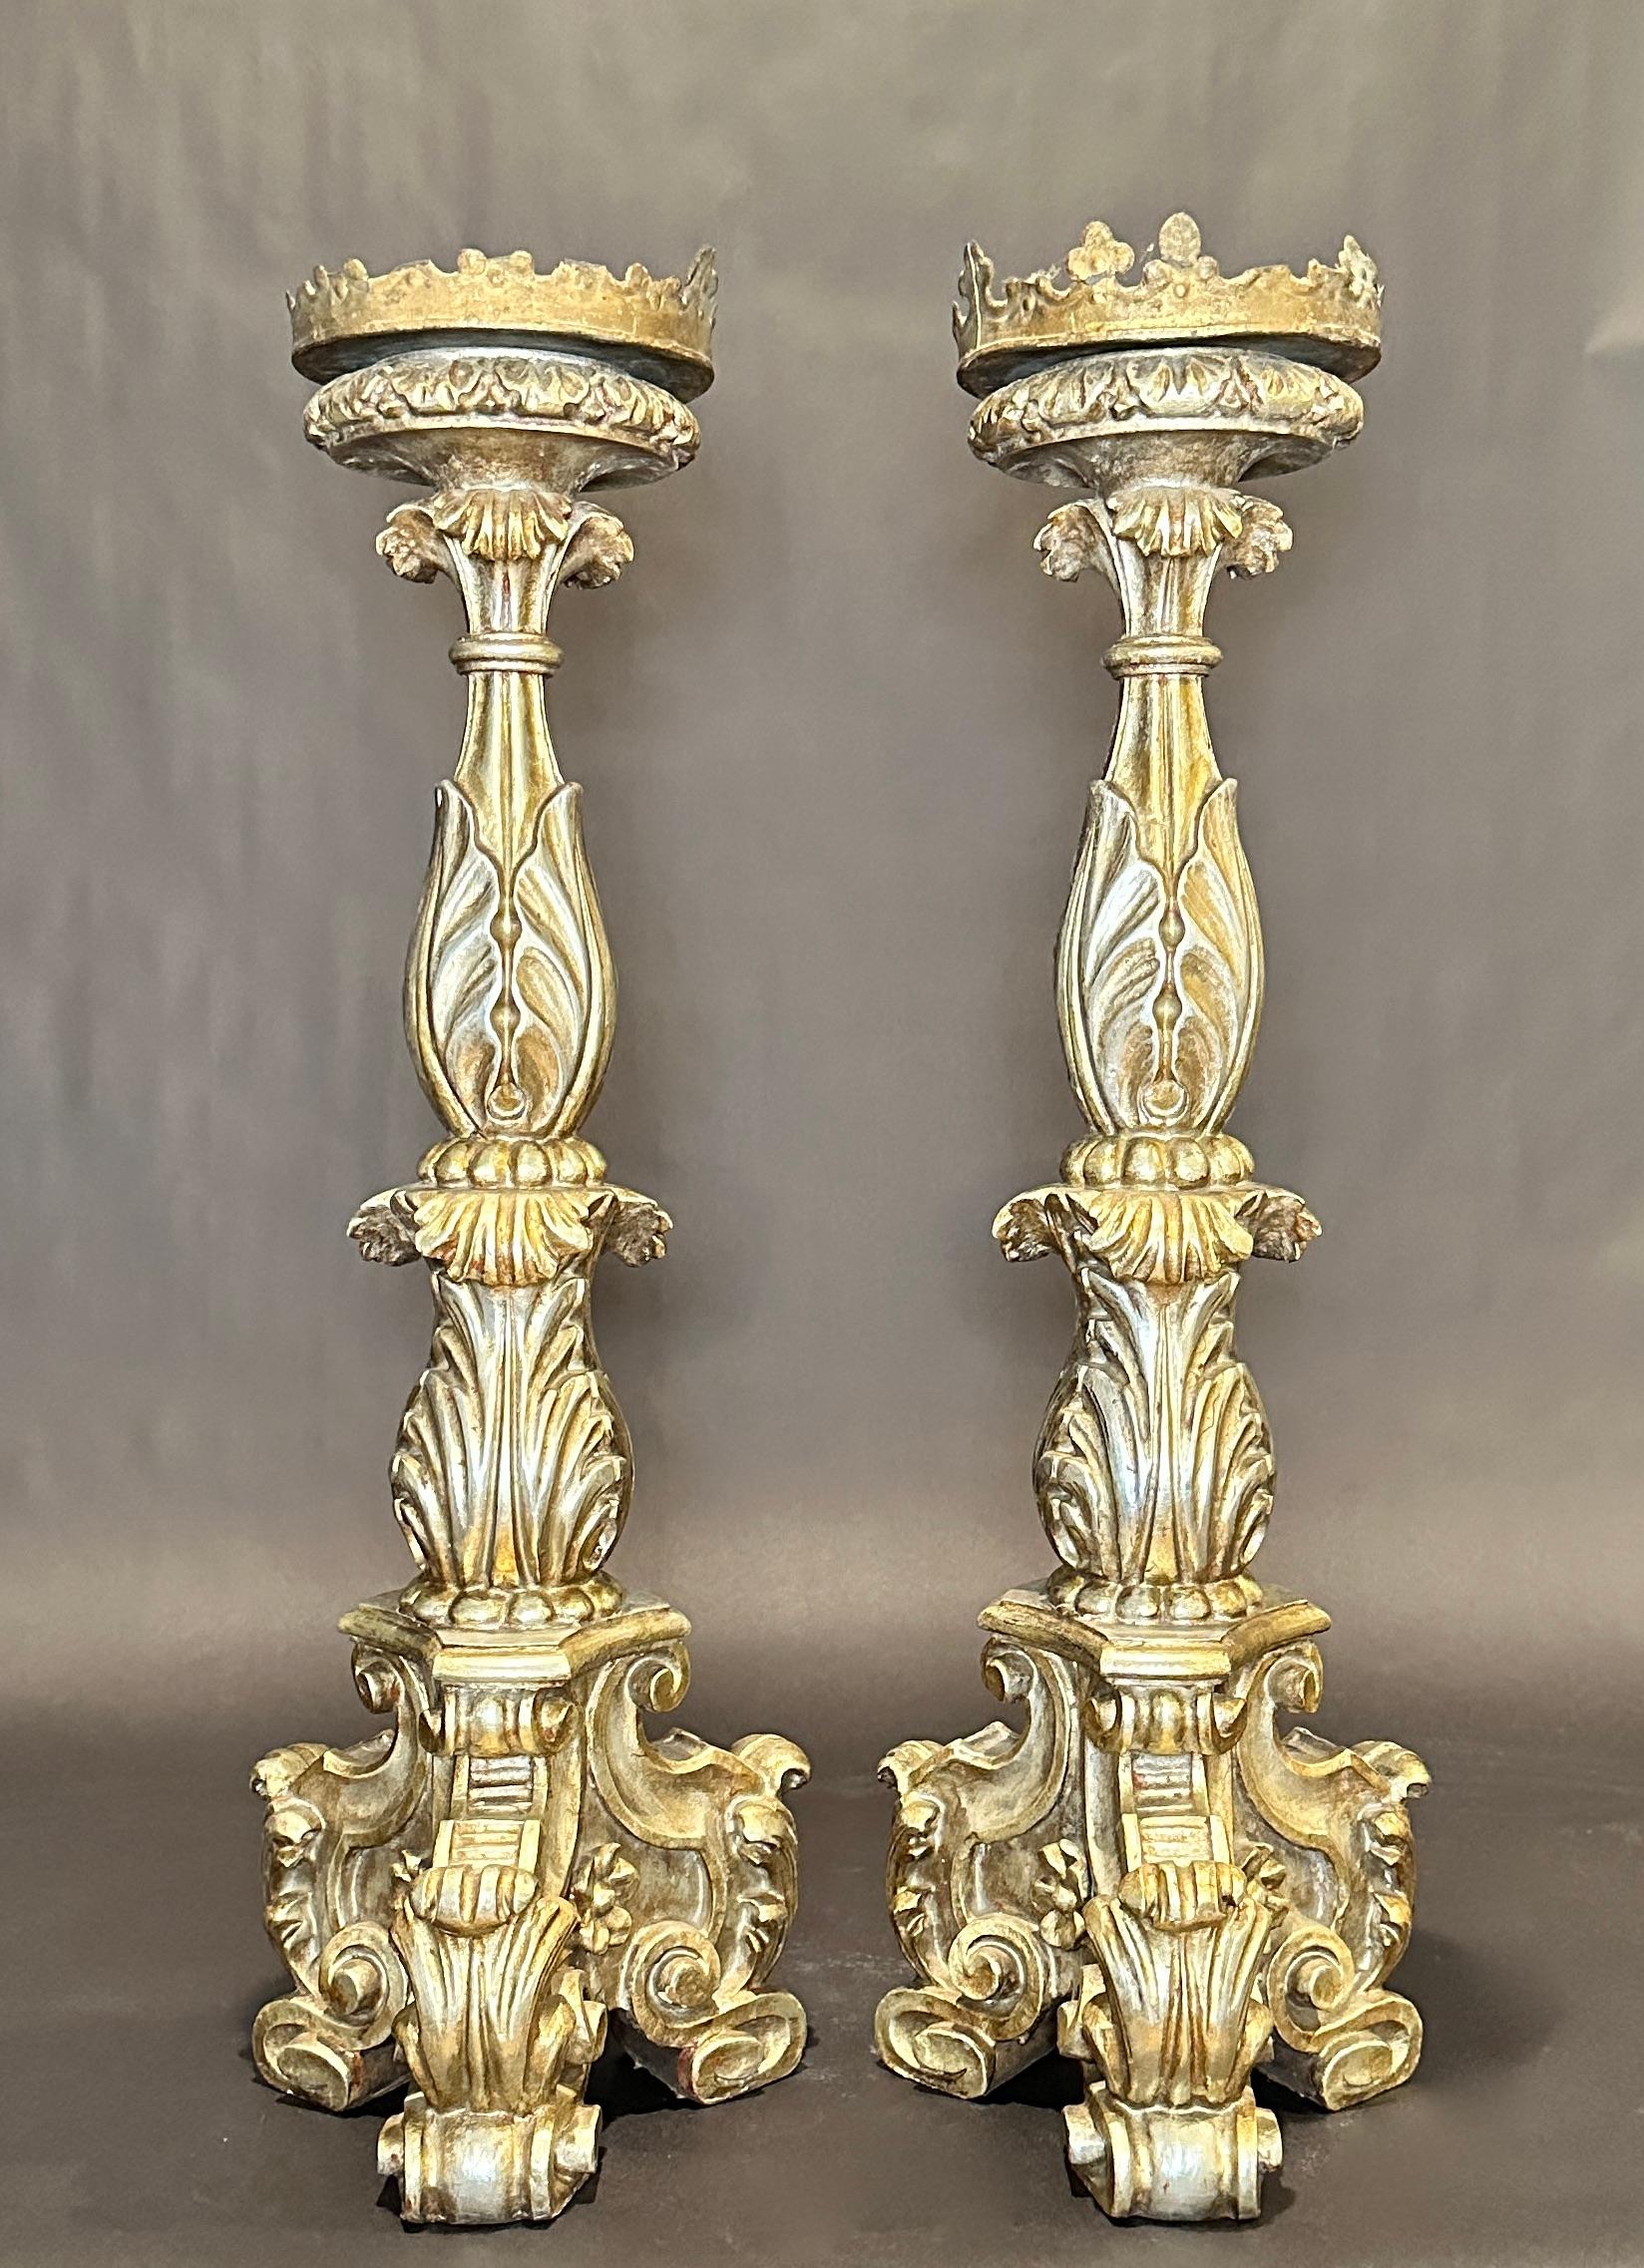 Italian Pair Of 19th Century Baroque Carved Wood Pricket Candlesticks For Sale